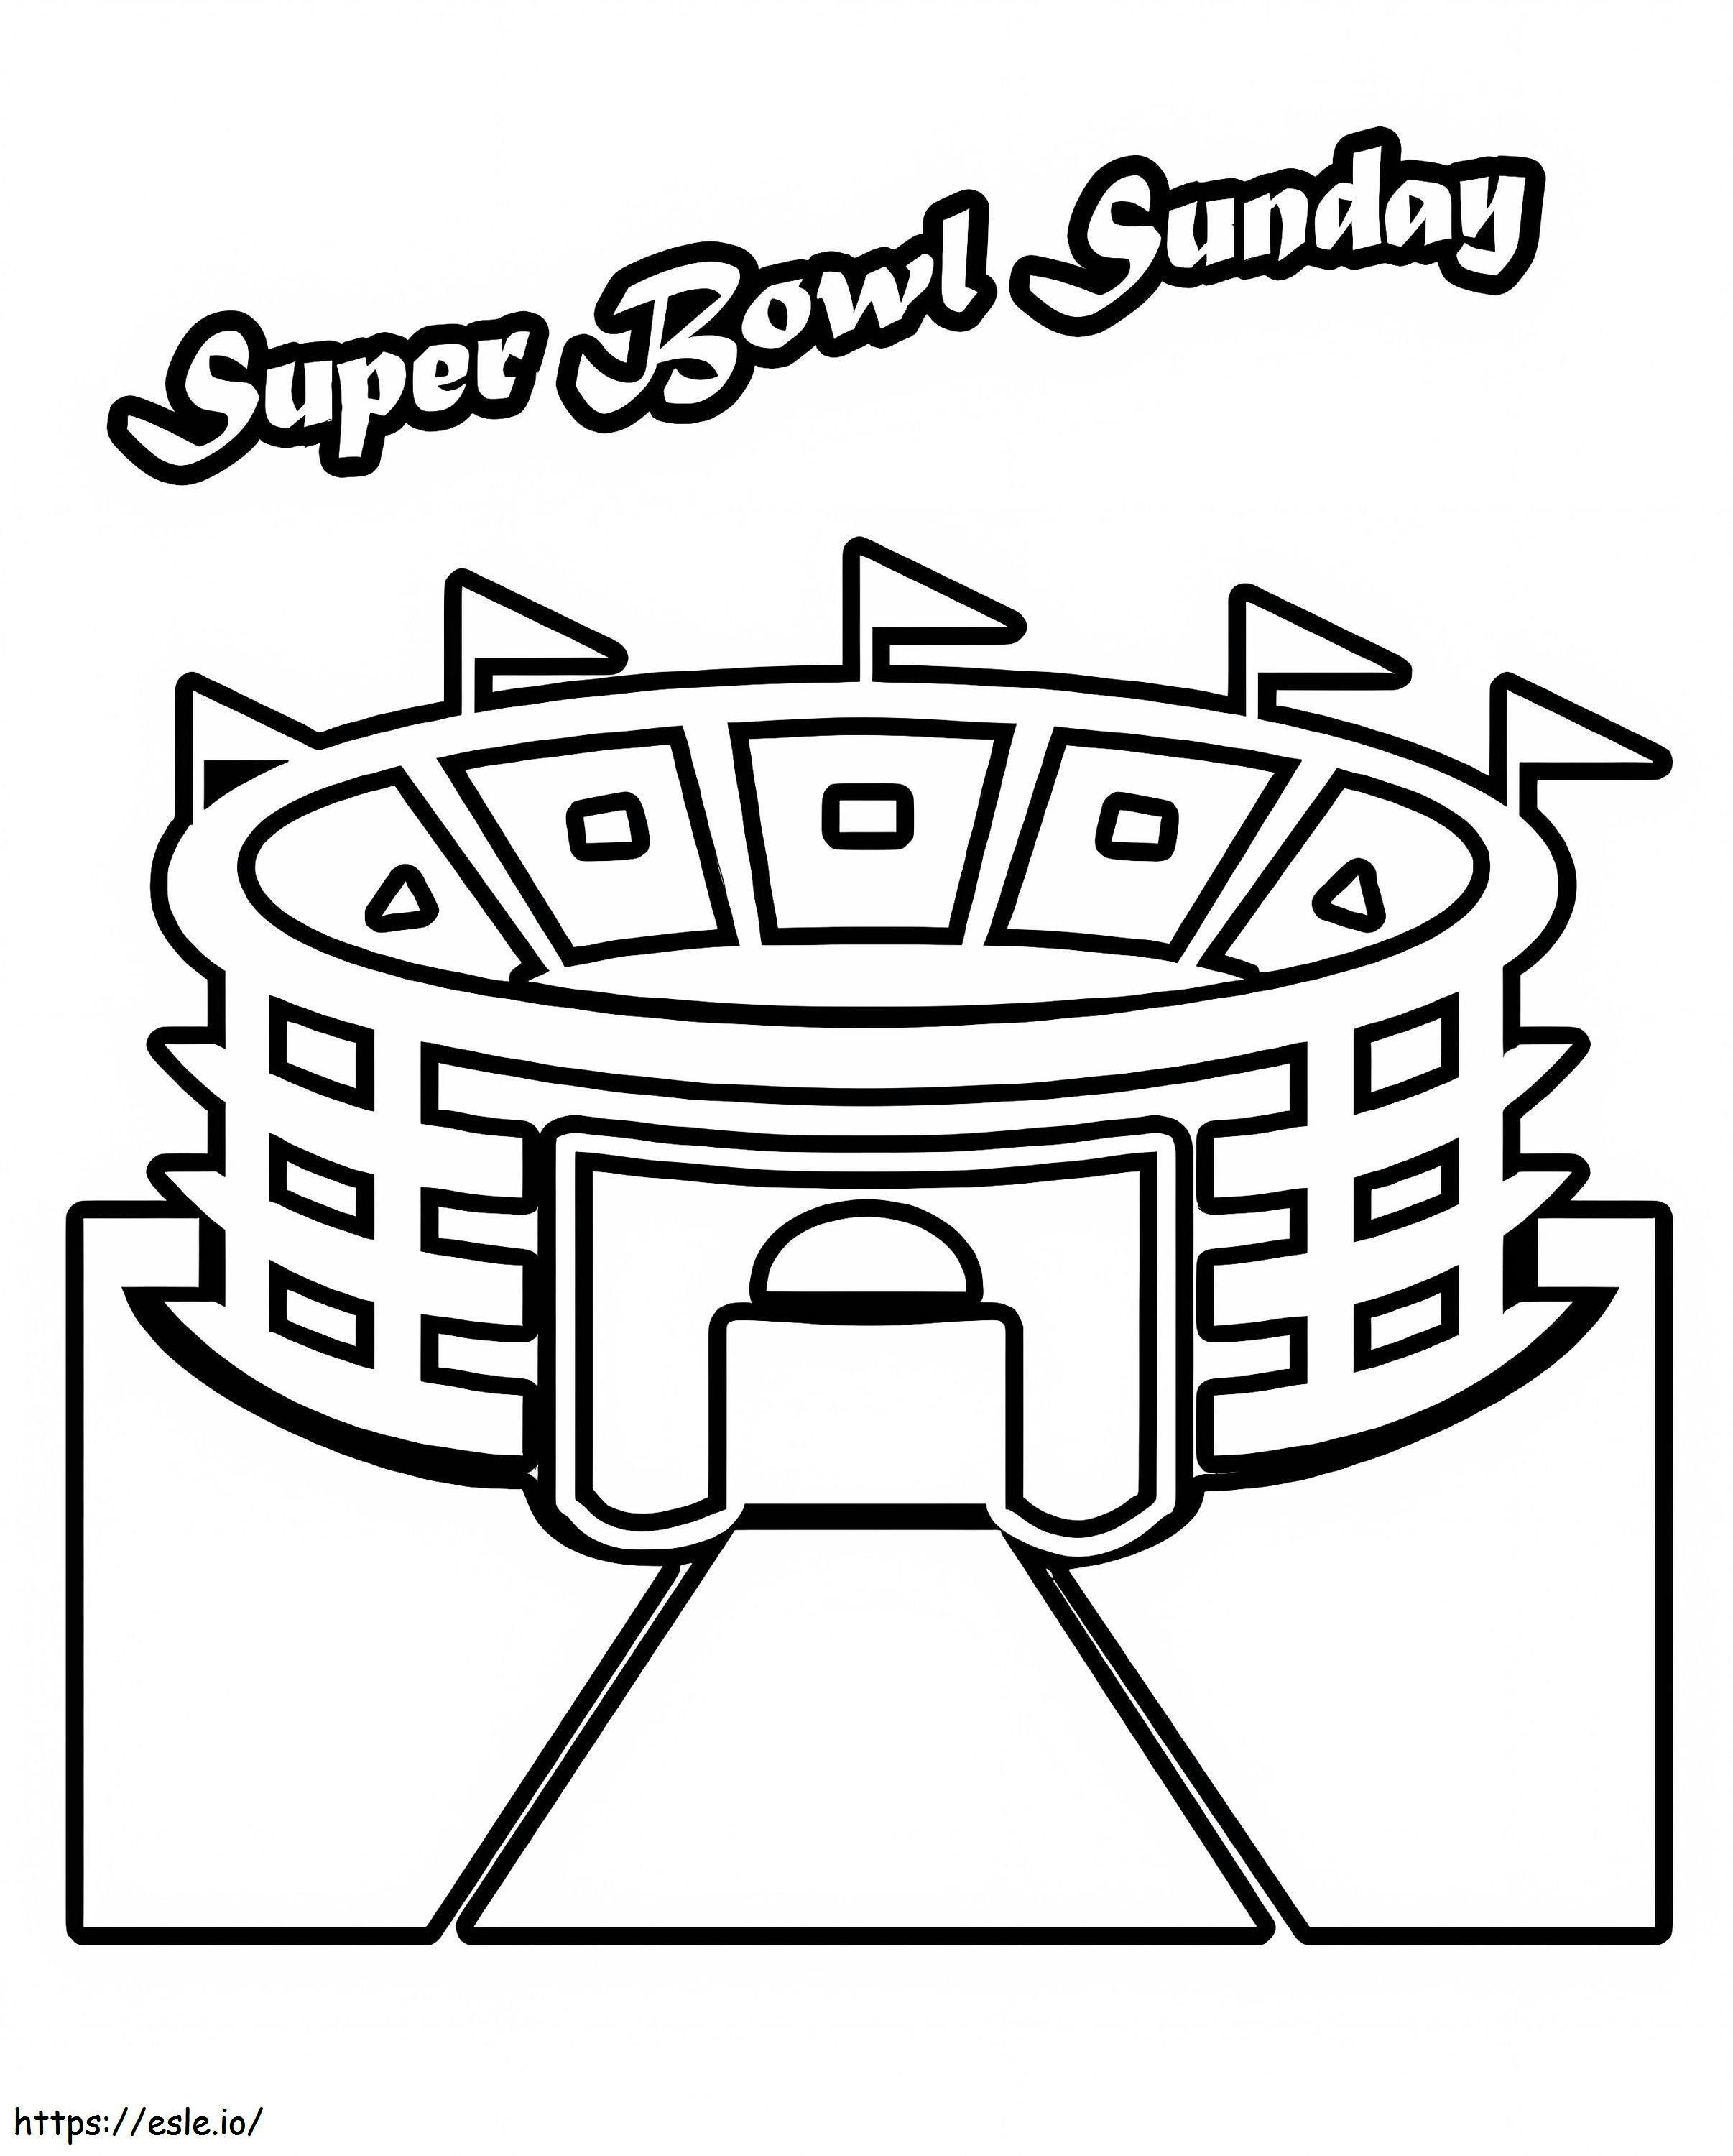 Sunday Super Bowl Coloring Page coloring page